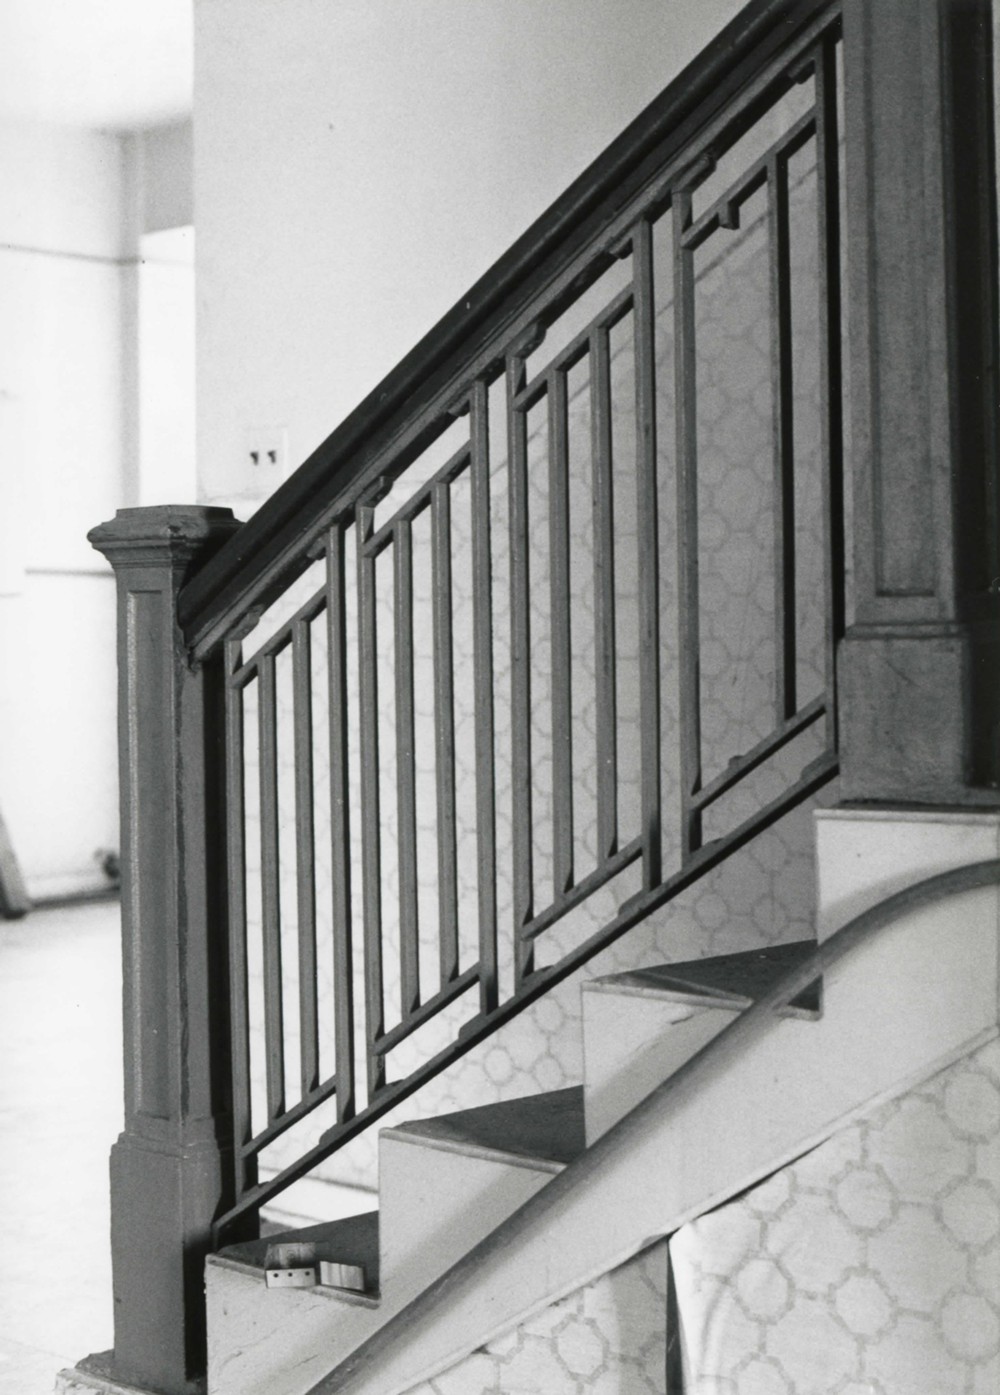 New Alcazar Hotel - Central Building, Clarksdale Mississippi Stairway 3<sup>rd</sup> floor (1994)